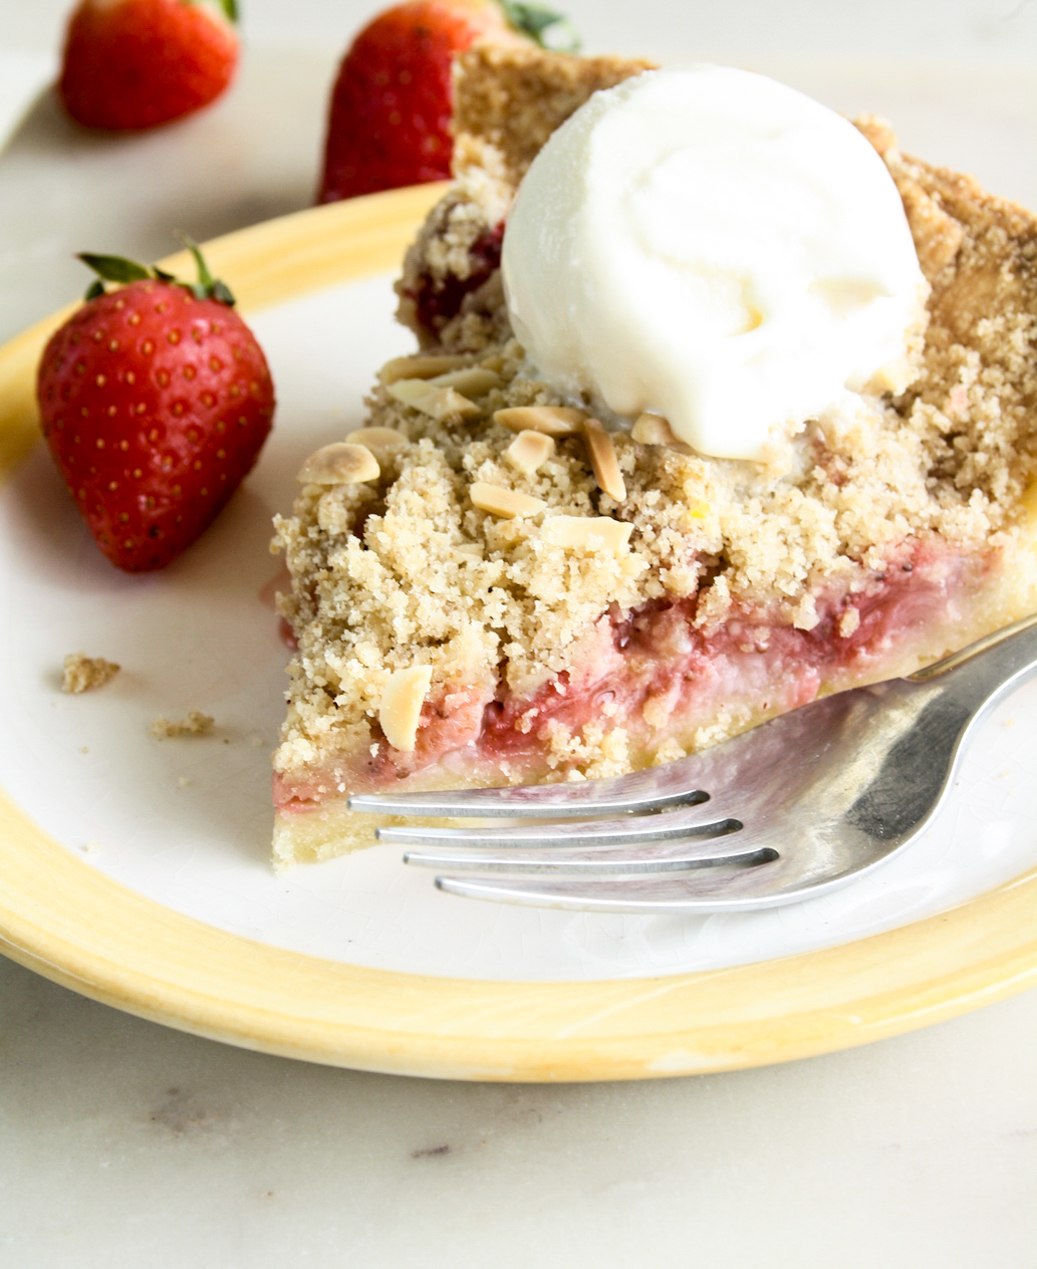 Juicy strawberries on homemade pie crust with a crunchy crumble topping